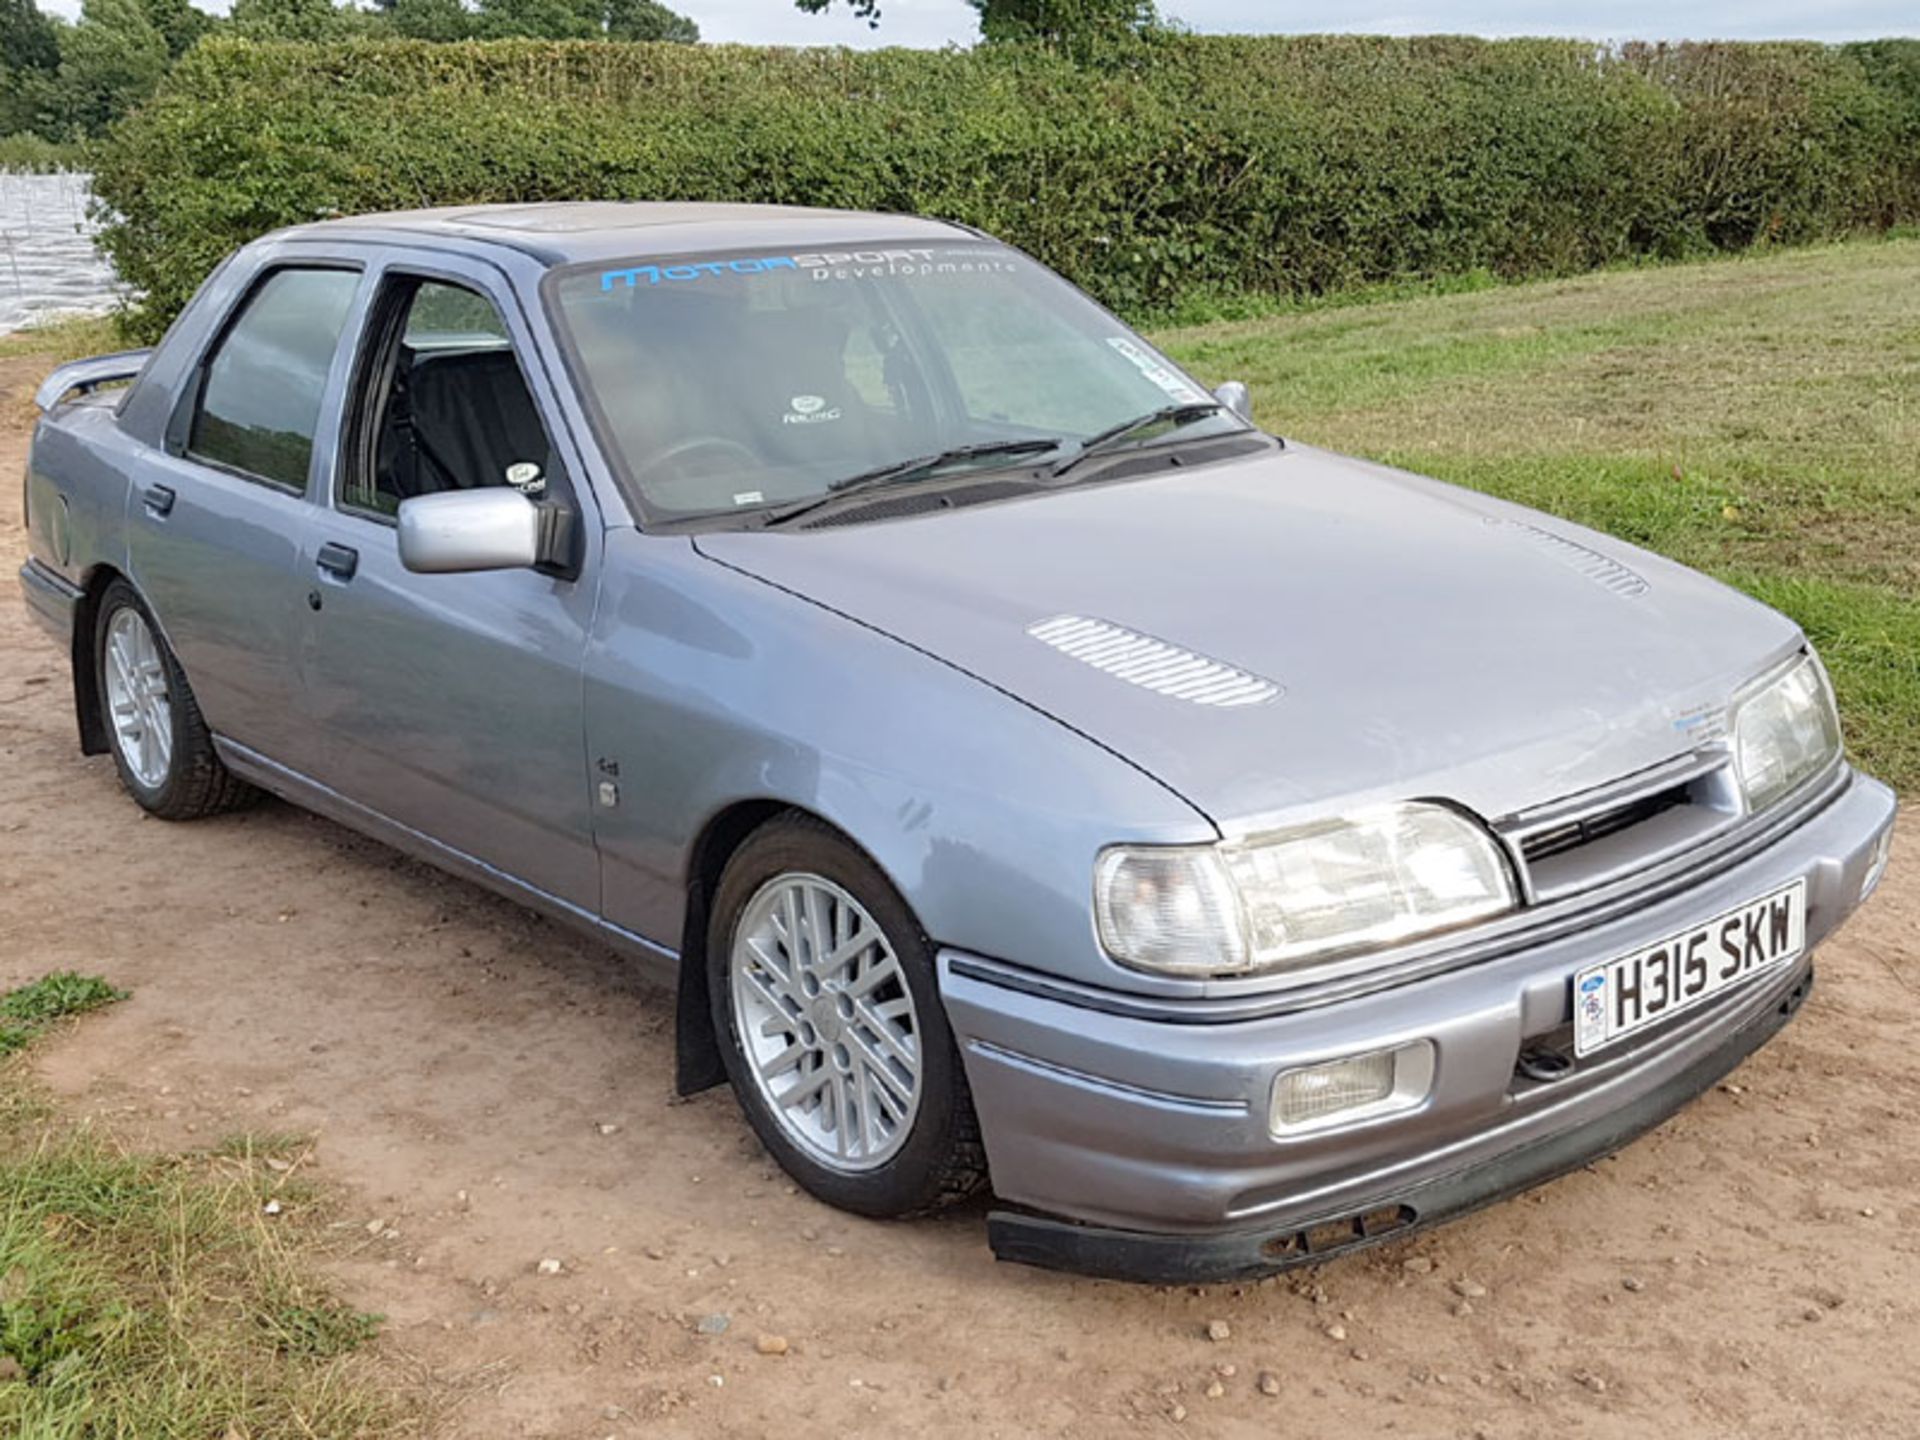 1991 Ford Sierra Sapphire RS Cosworth - Image 2 of 4